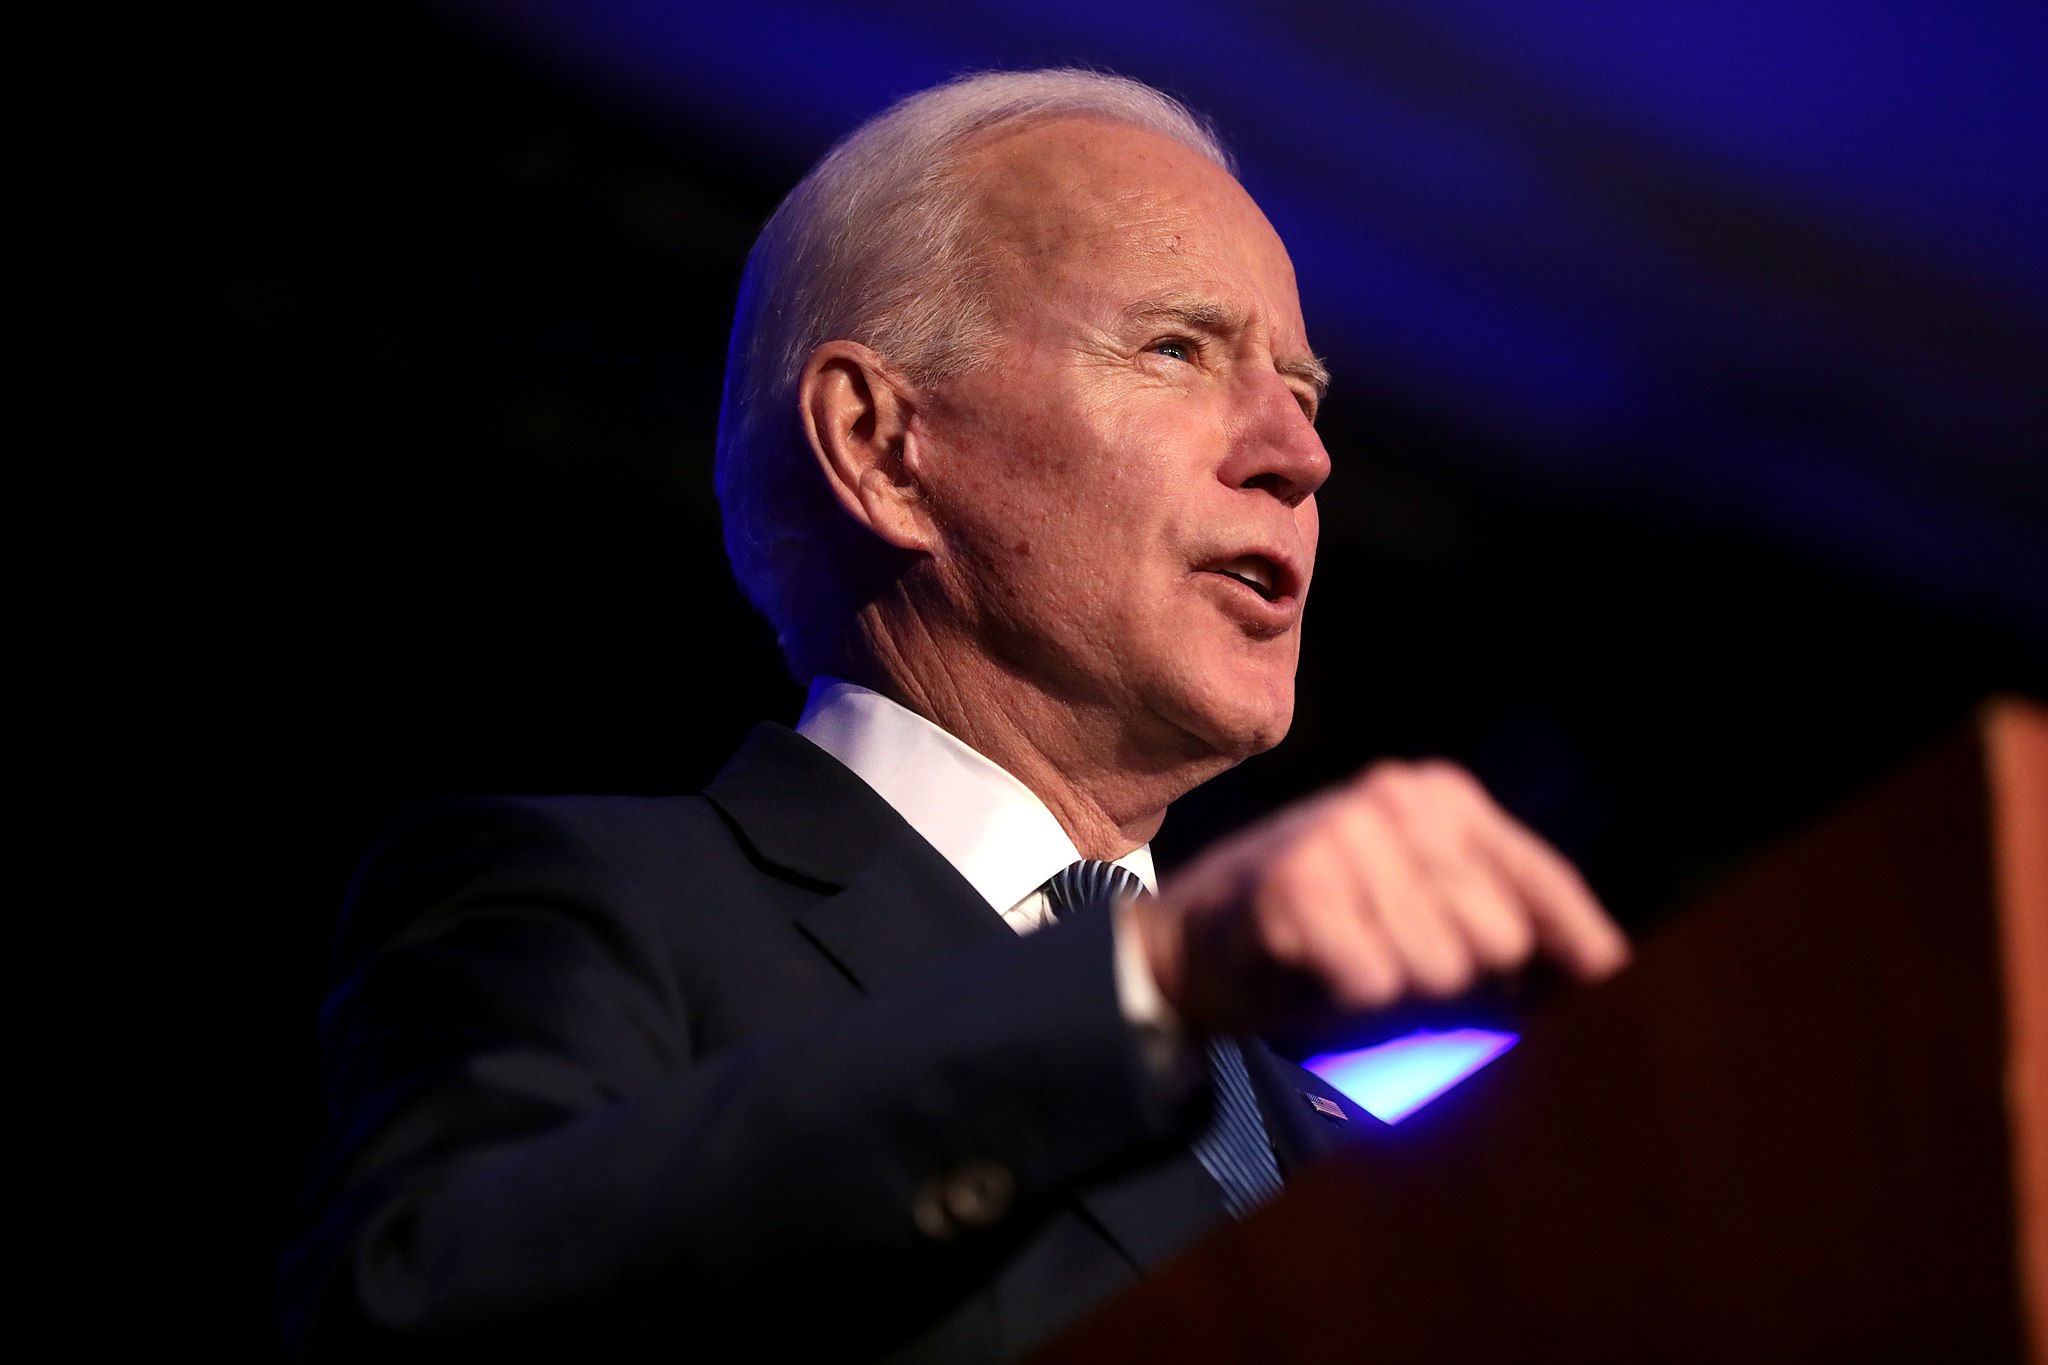 Does Biden Have Better Or Worse Chances Of Being Re-Elected Since 2020?